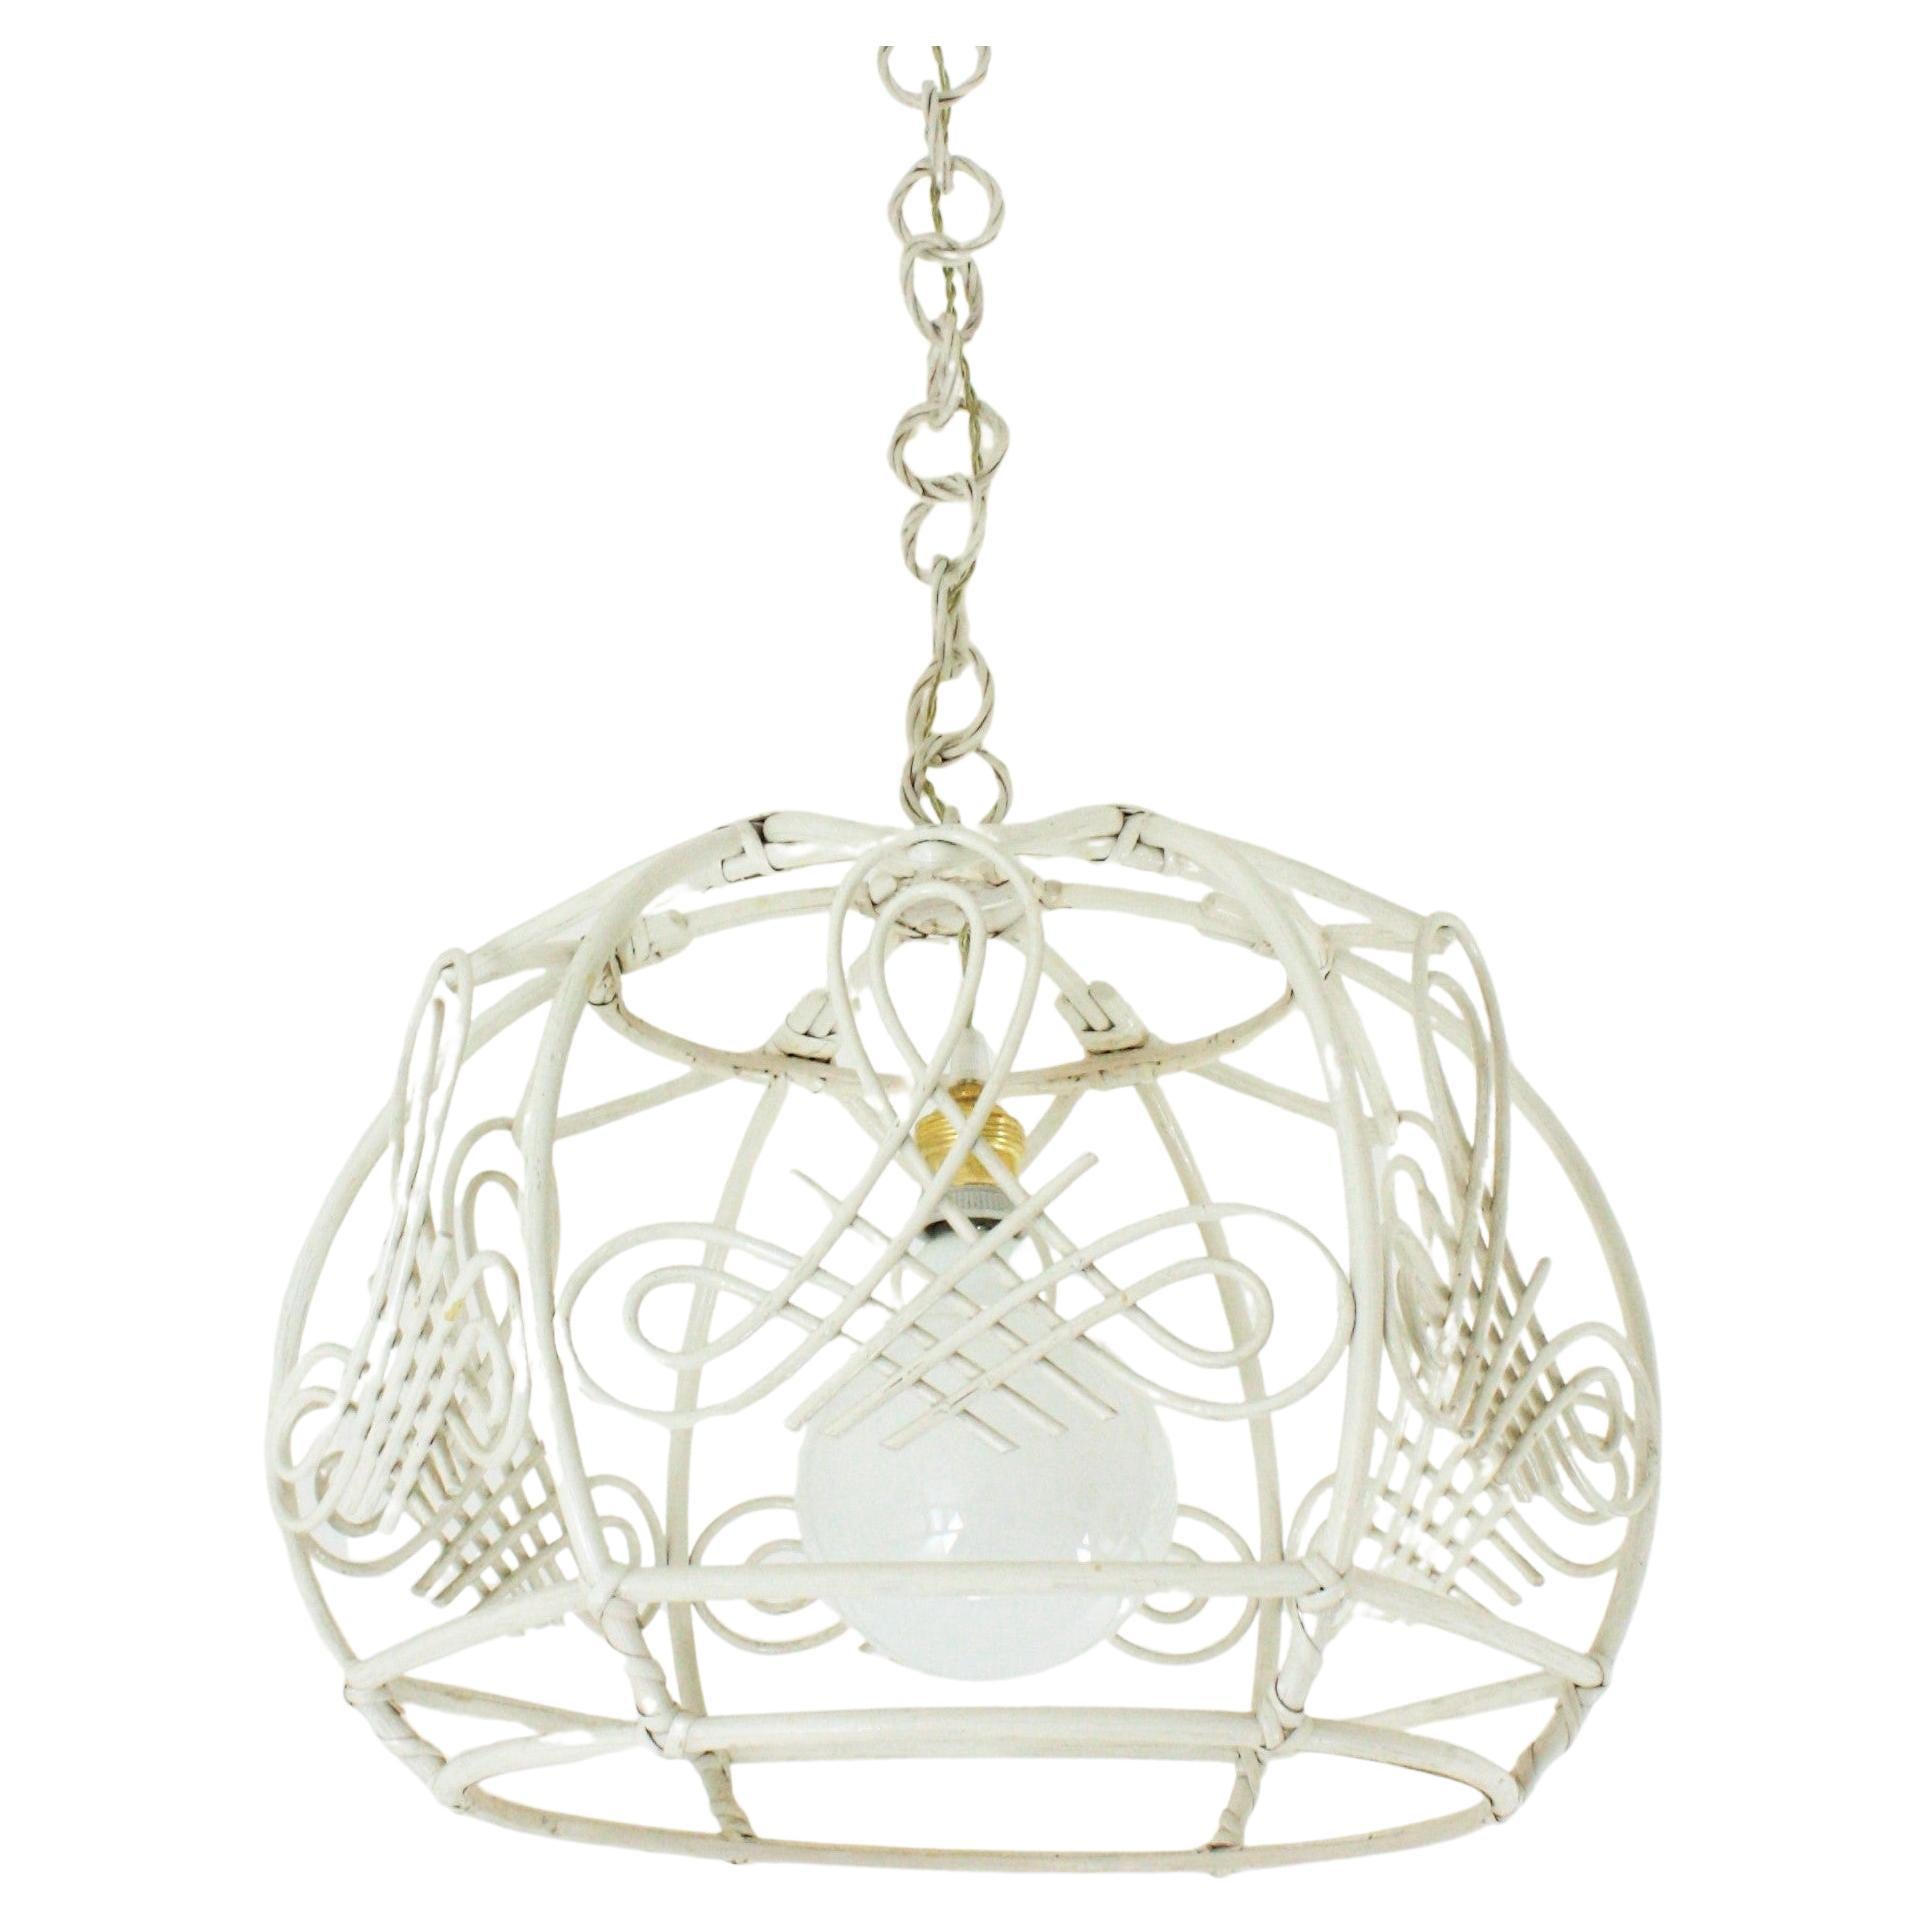 Large French Riviera rattan bell shaped pendant light or lantern, France, 1960s.
This handcrafted ceiling lamp features a bamboo bell shaped shade with chinoiserie decorations hanging from a chain with round rattan / bamboo links that can be cut in